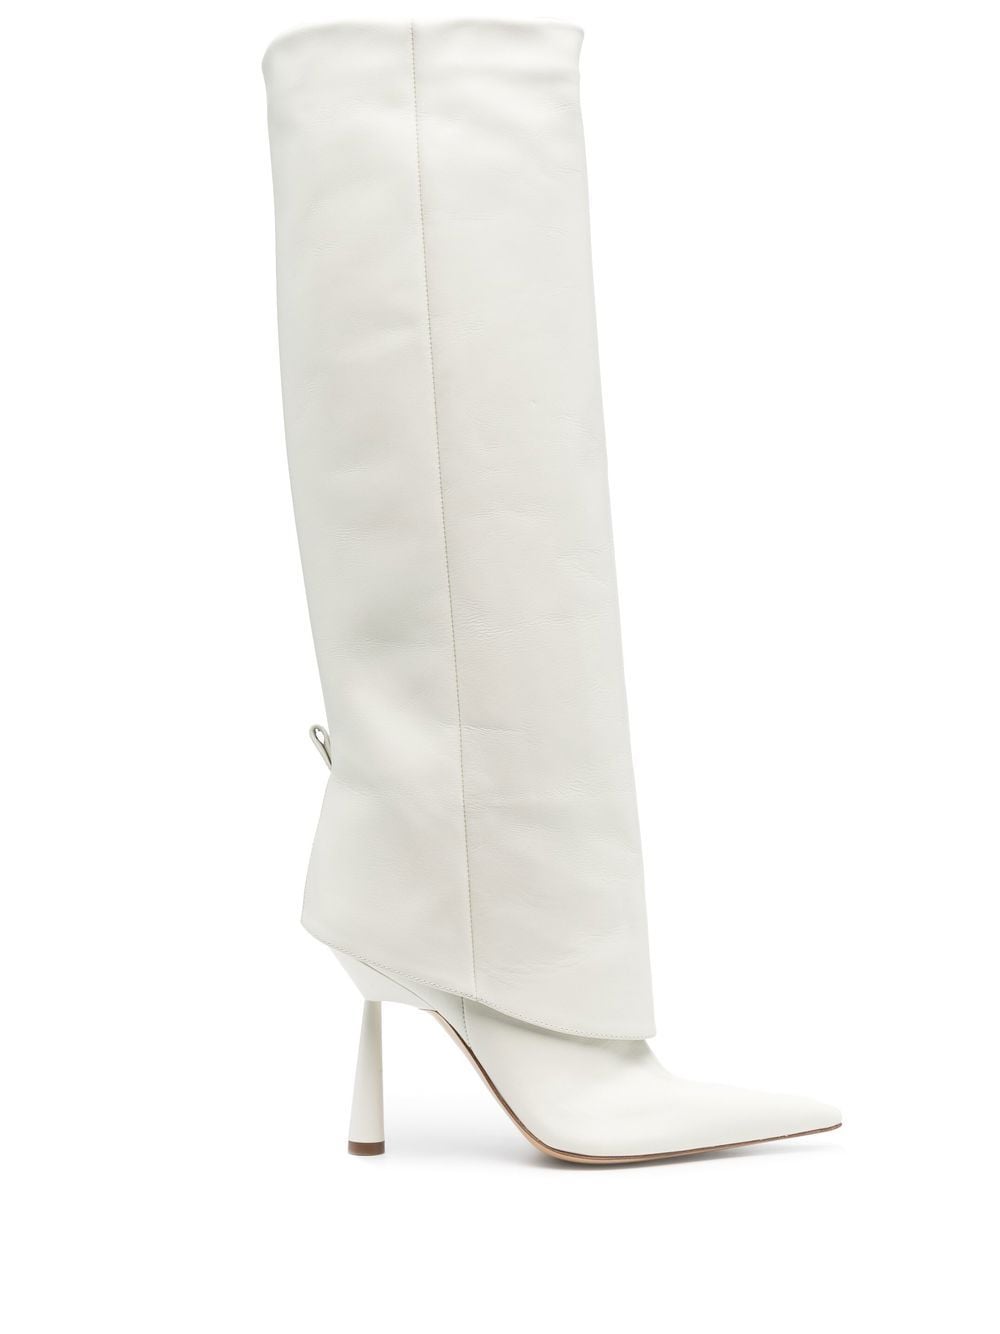 GIABORGHINI Rosie 110mm knee-high boots